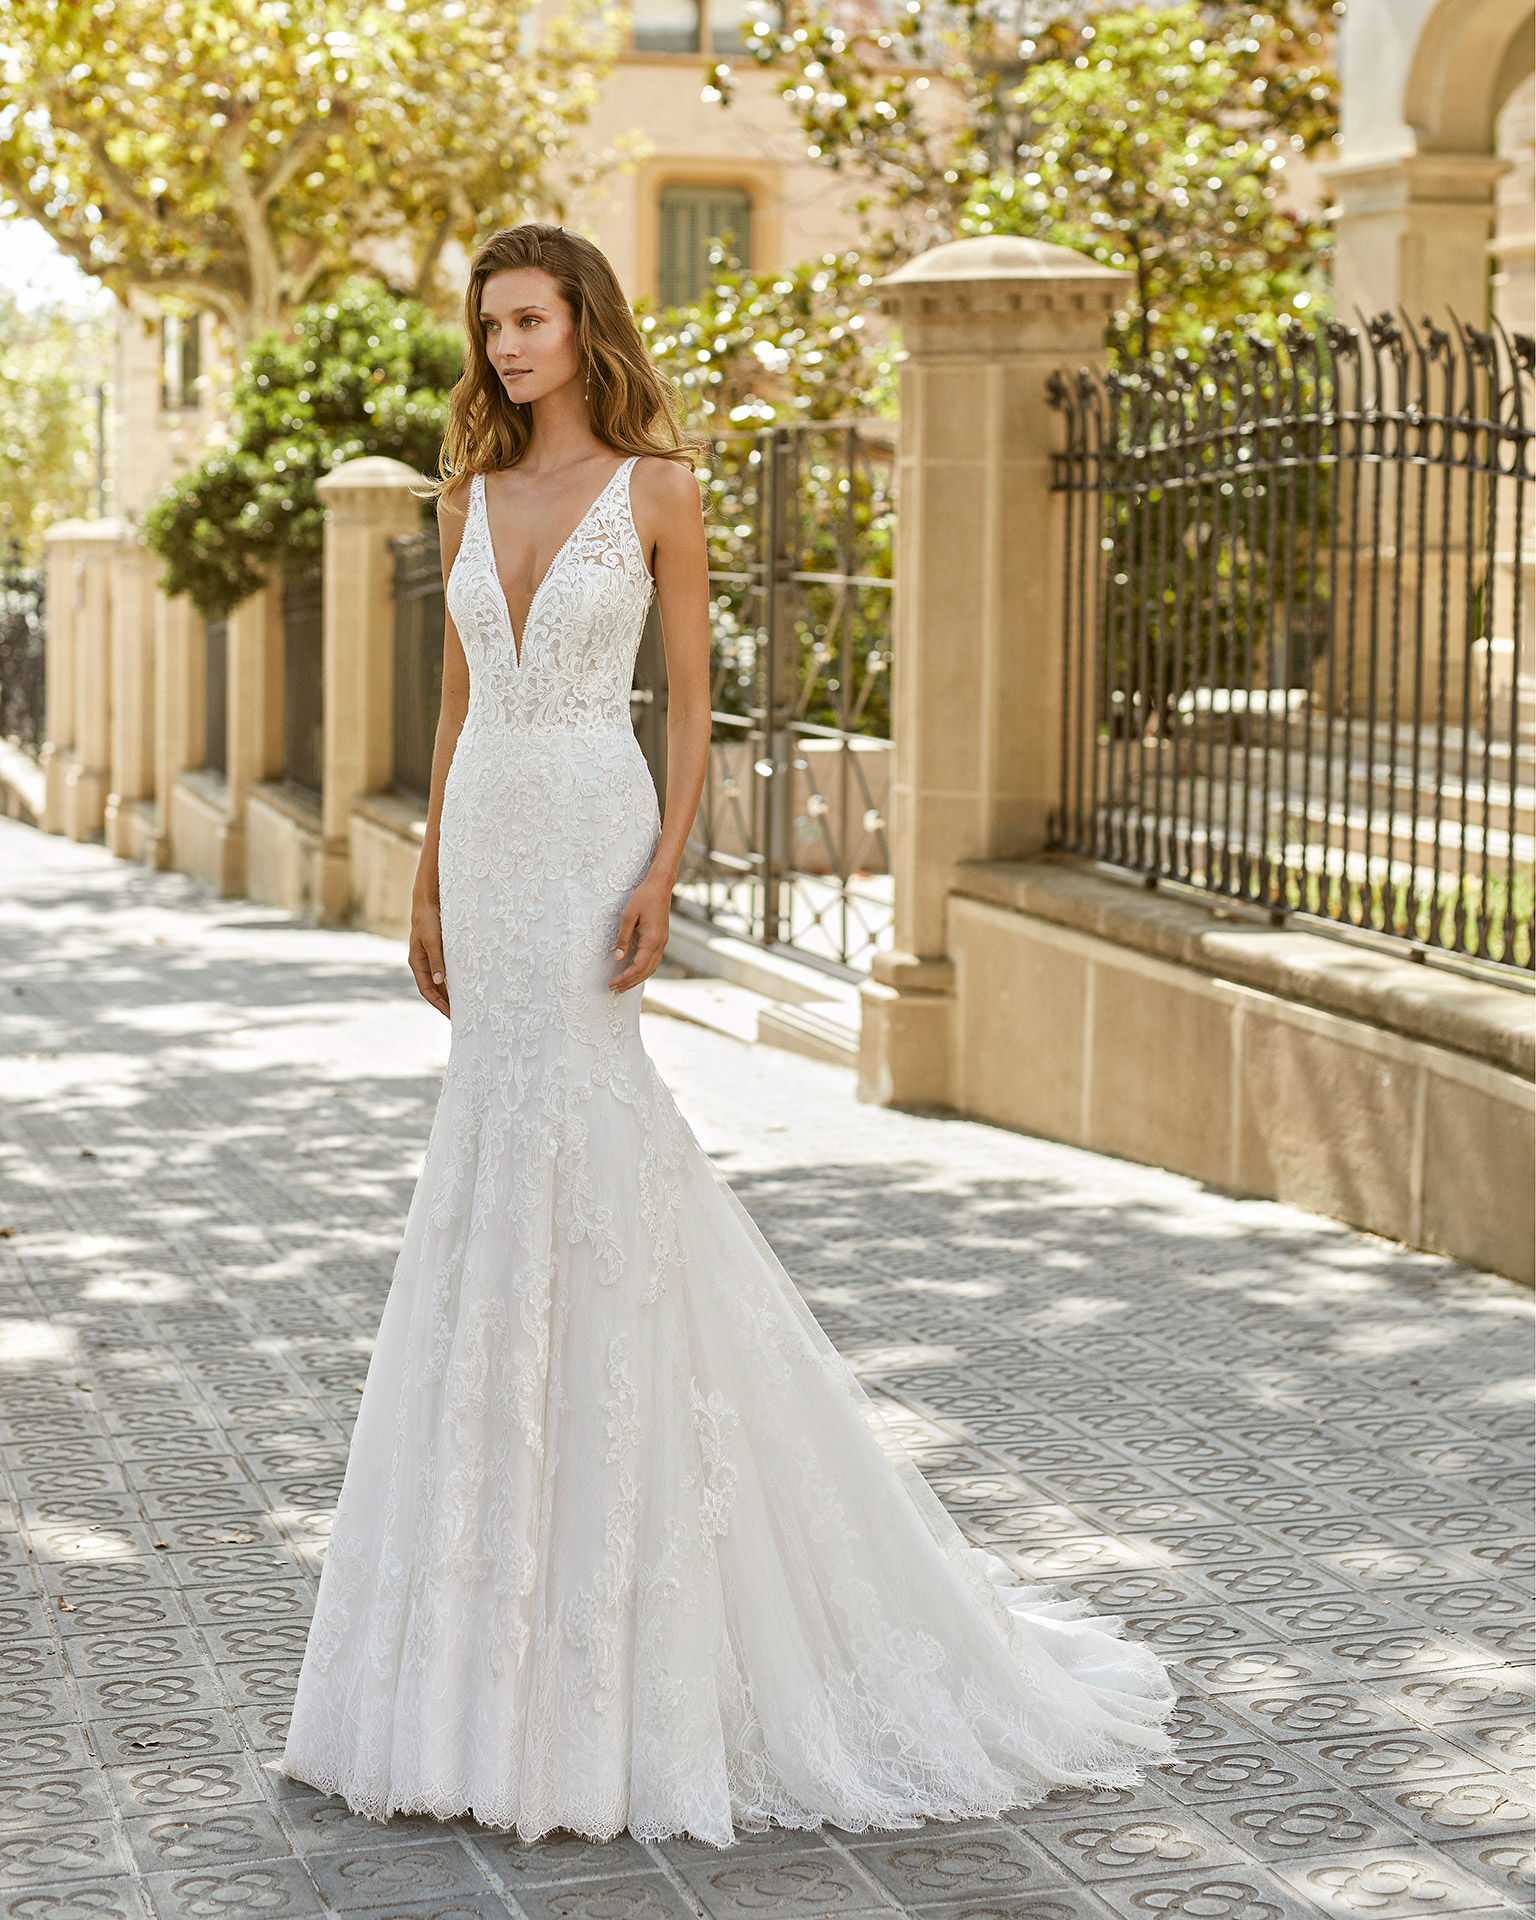 Mermaid wedding dress, beaded lace. Deep-plunge neckline, back with lace appliqué. 2022  Collection.